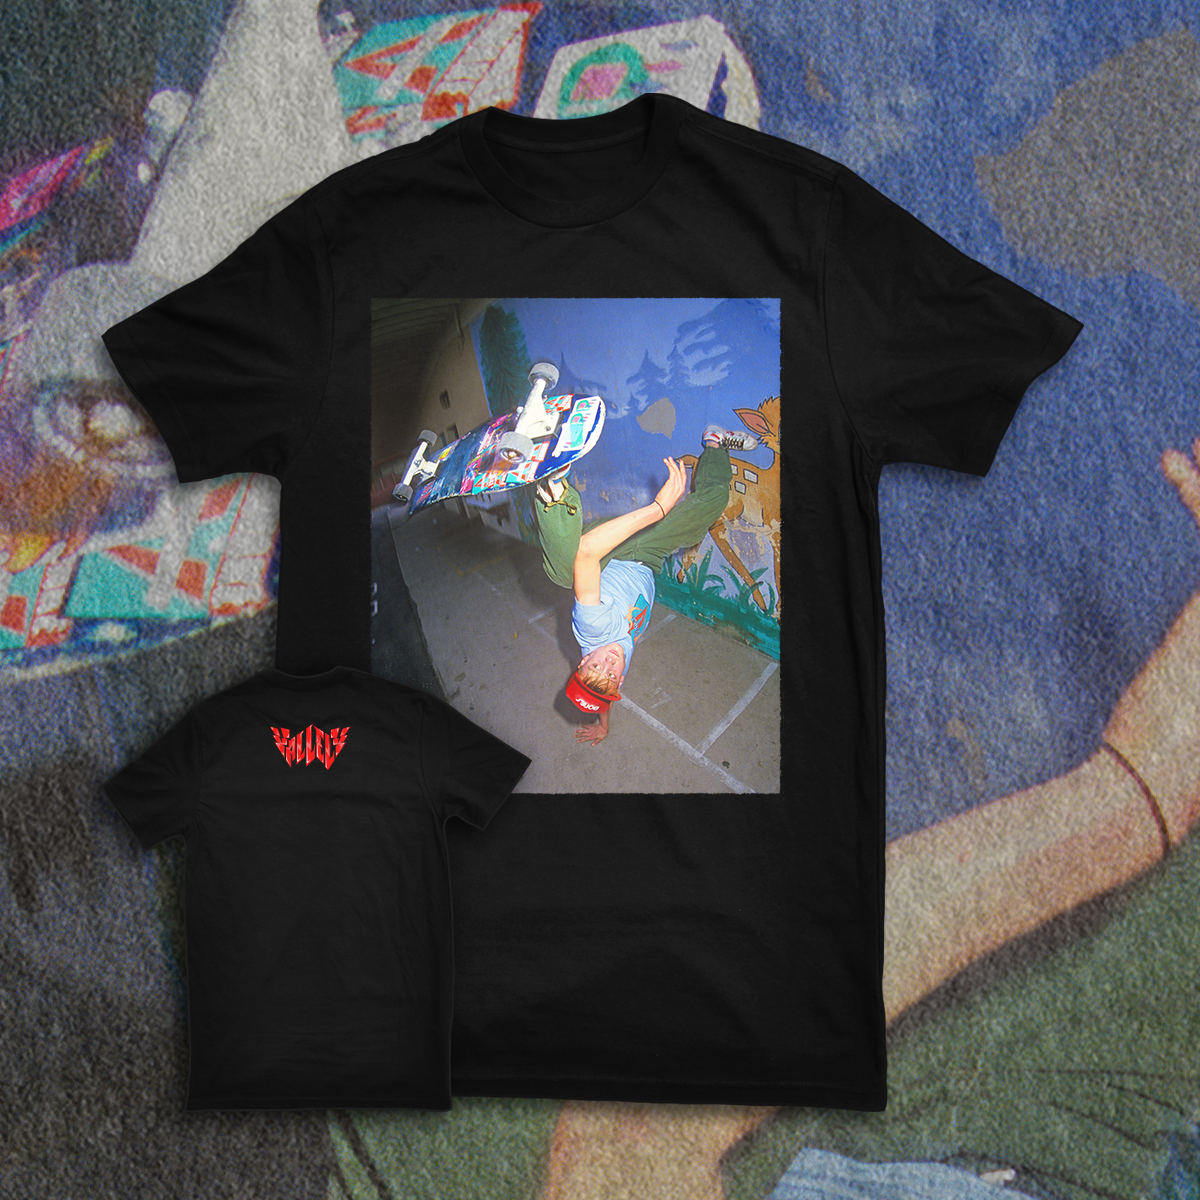 MIKE VALLELY "SAN DIEGO" SHIRT